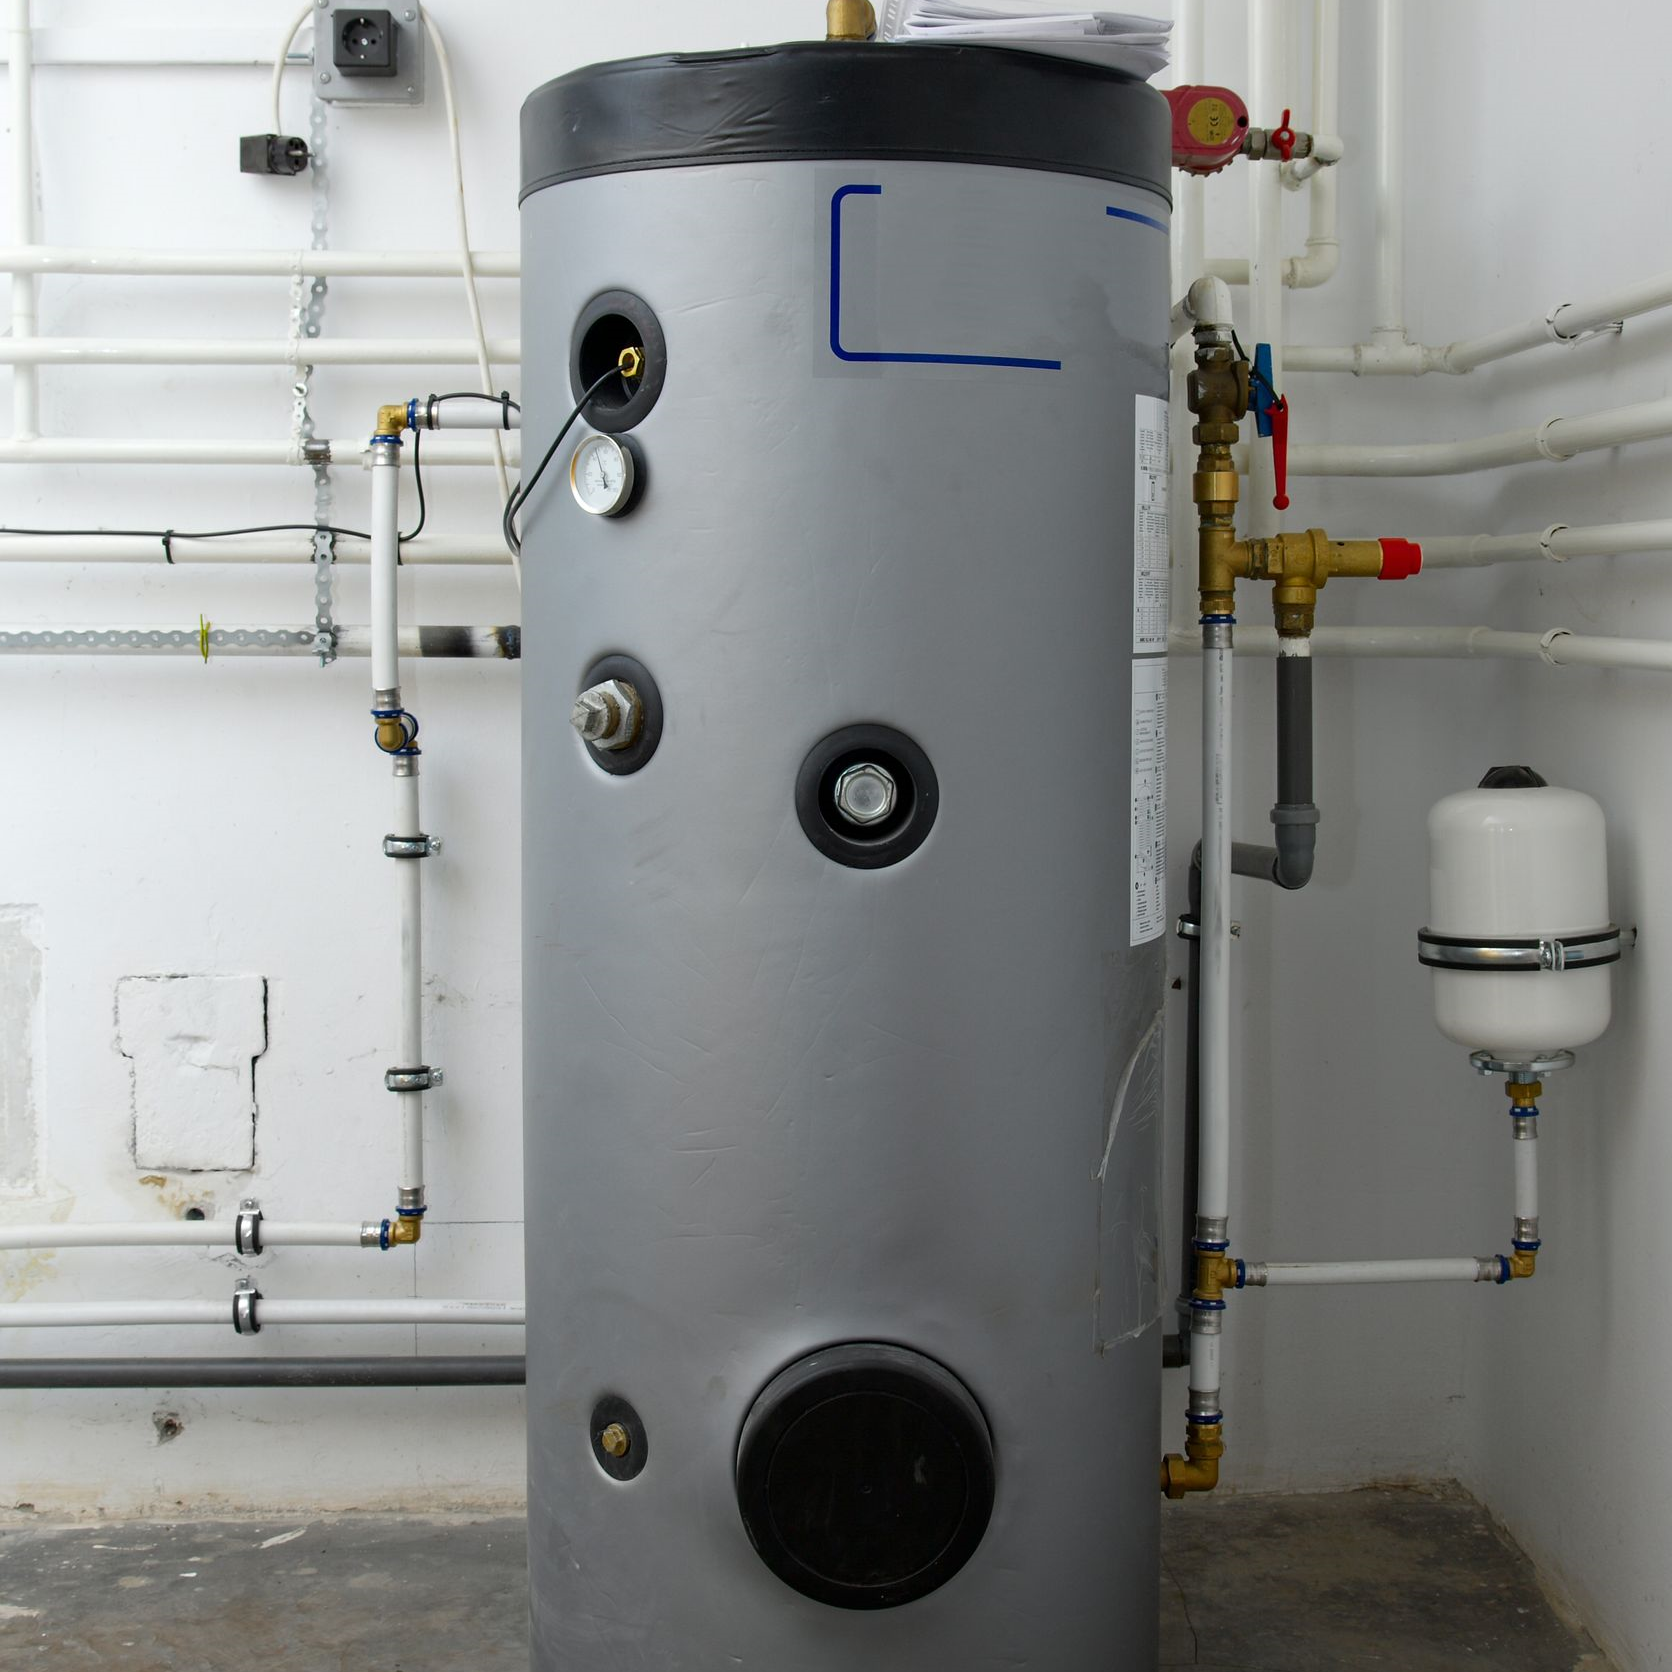 Boiler with water pipes.